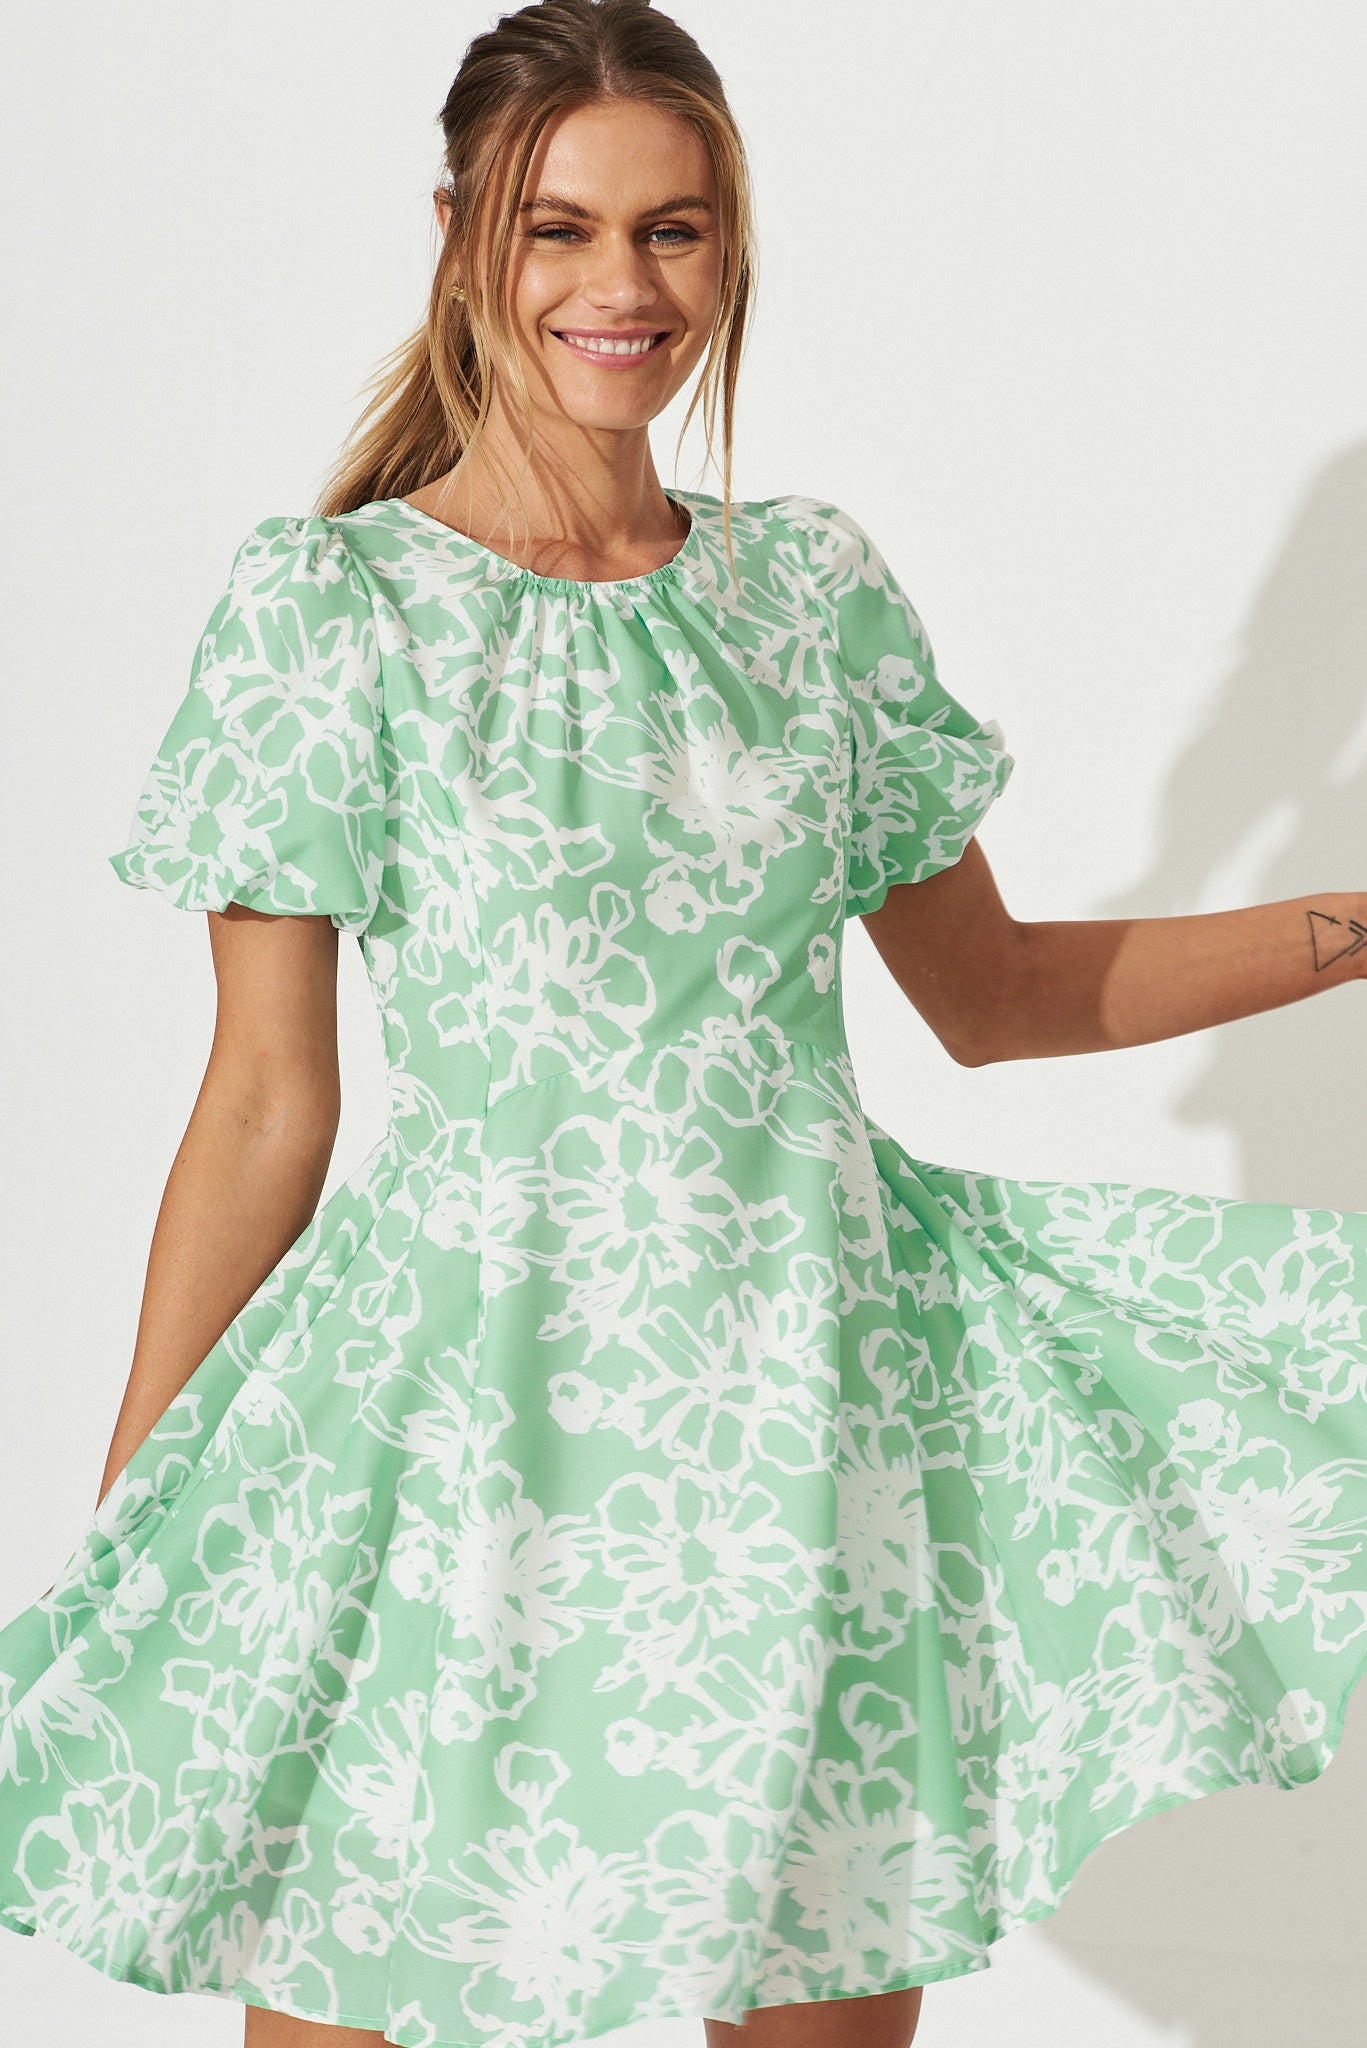 Kinsley Dress In Green With White Floral Print Cotton Blend - front